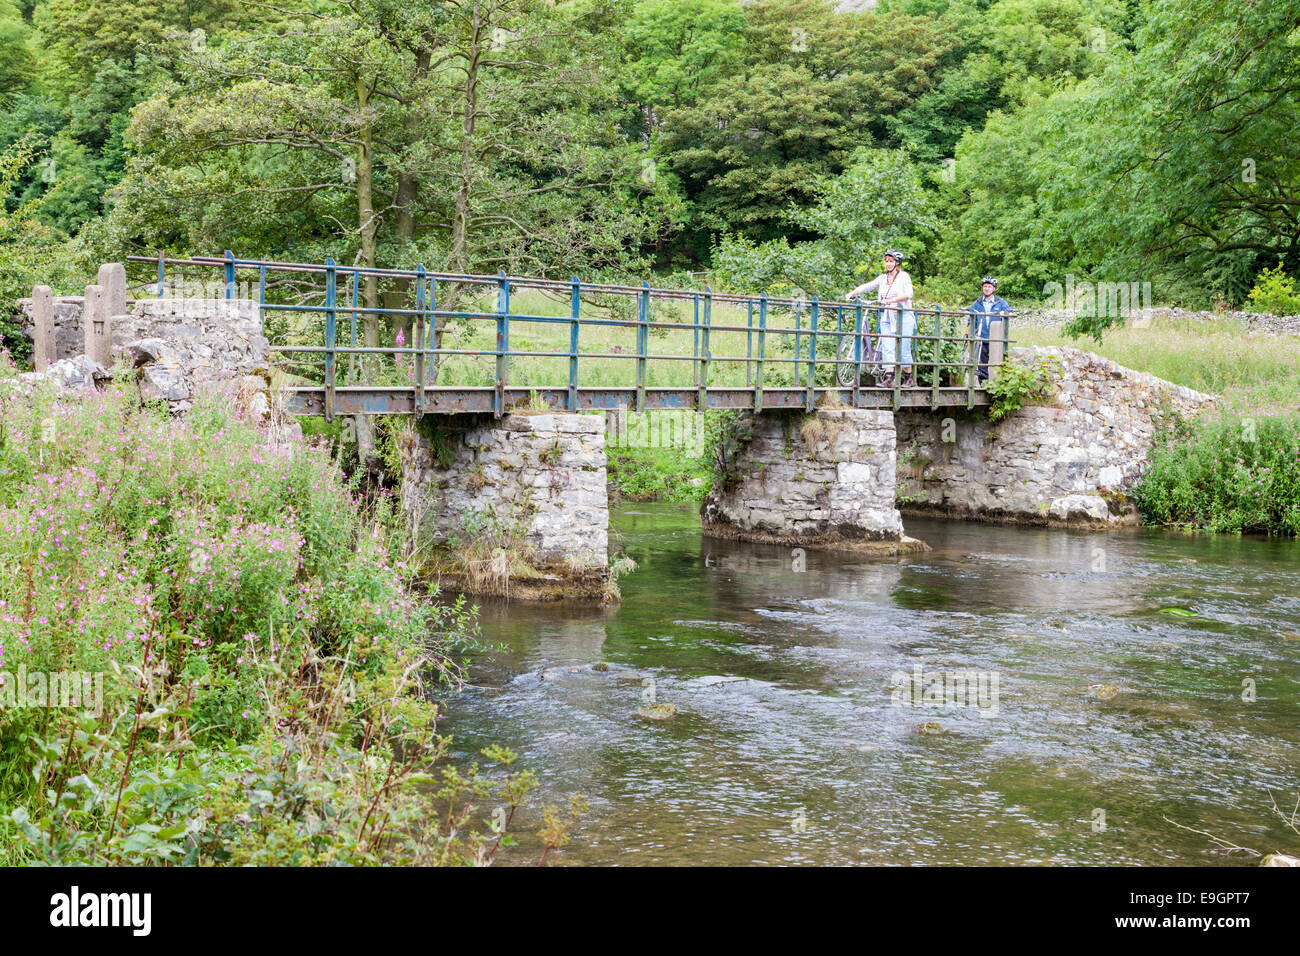 People crossing a bridge over the River Wye at Upperdale in the Derbyshire Dales, Peak District National Park, England, UK Stock Photo